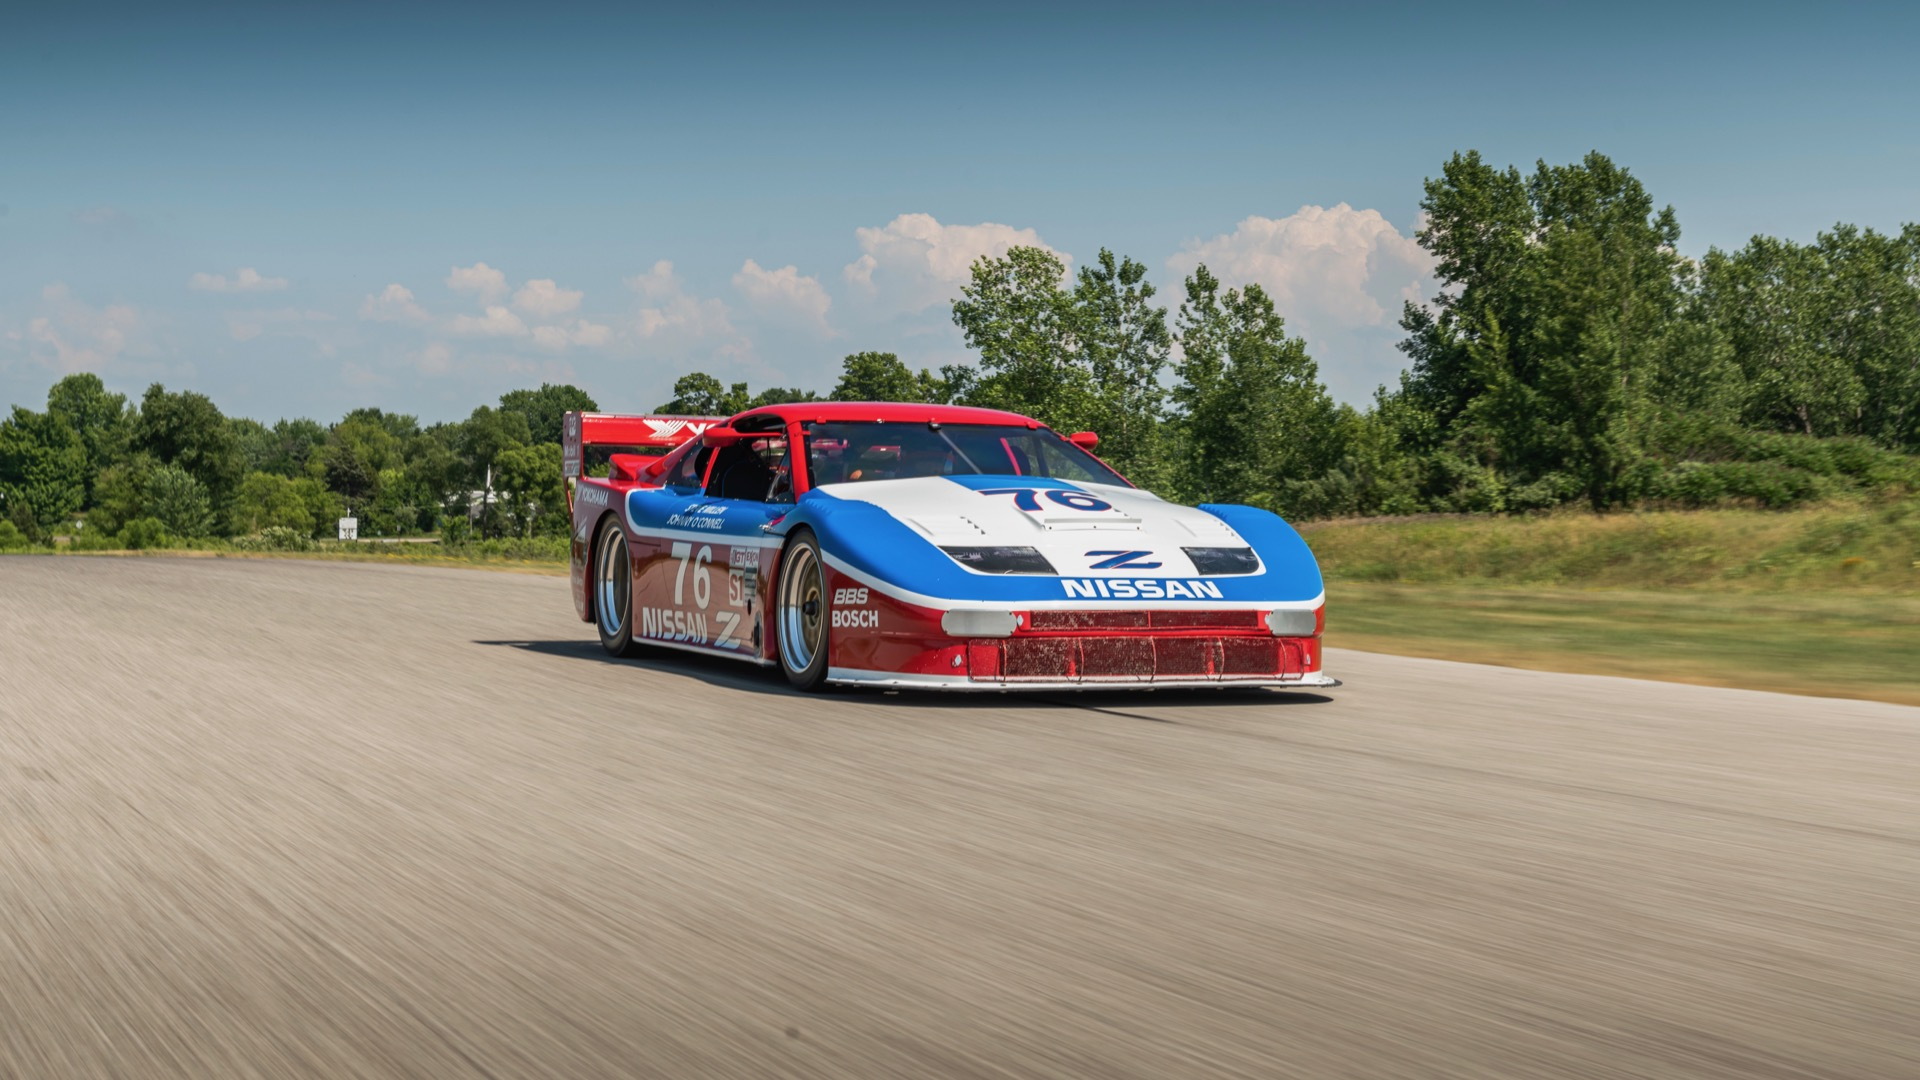 1989 Nissan 300ZX IMSA GTO race car for sale by Stratas Auctions